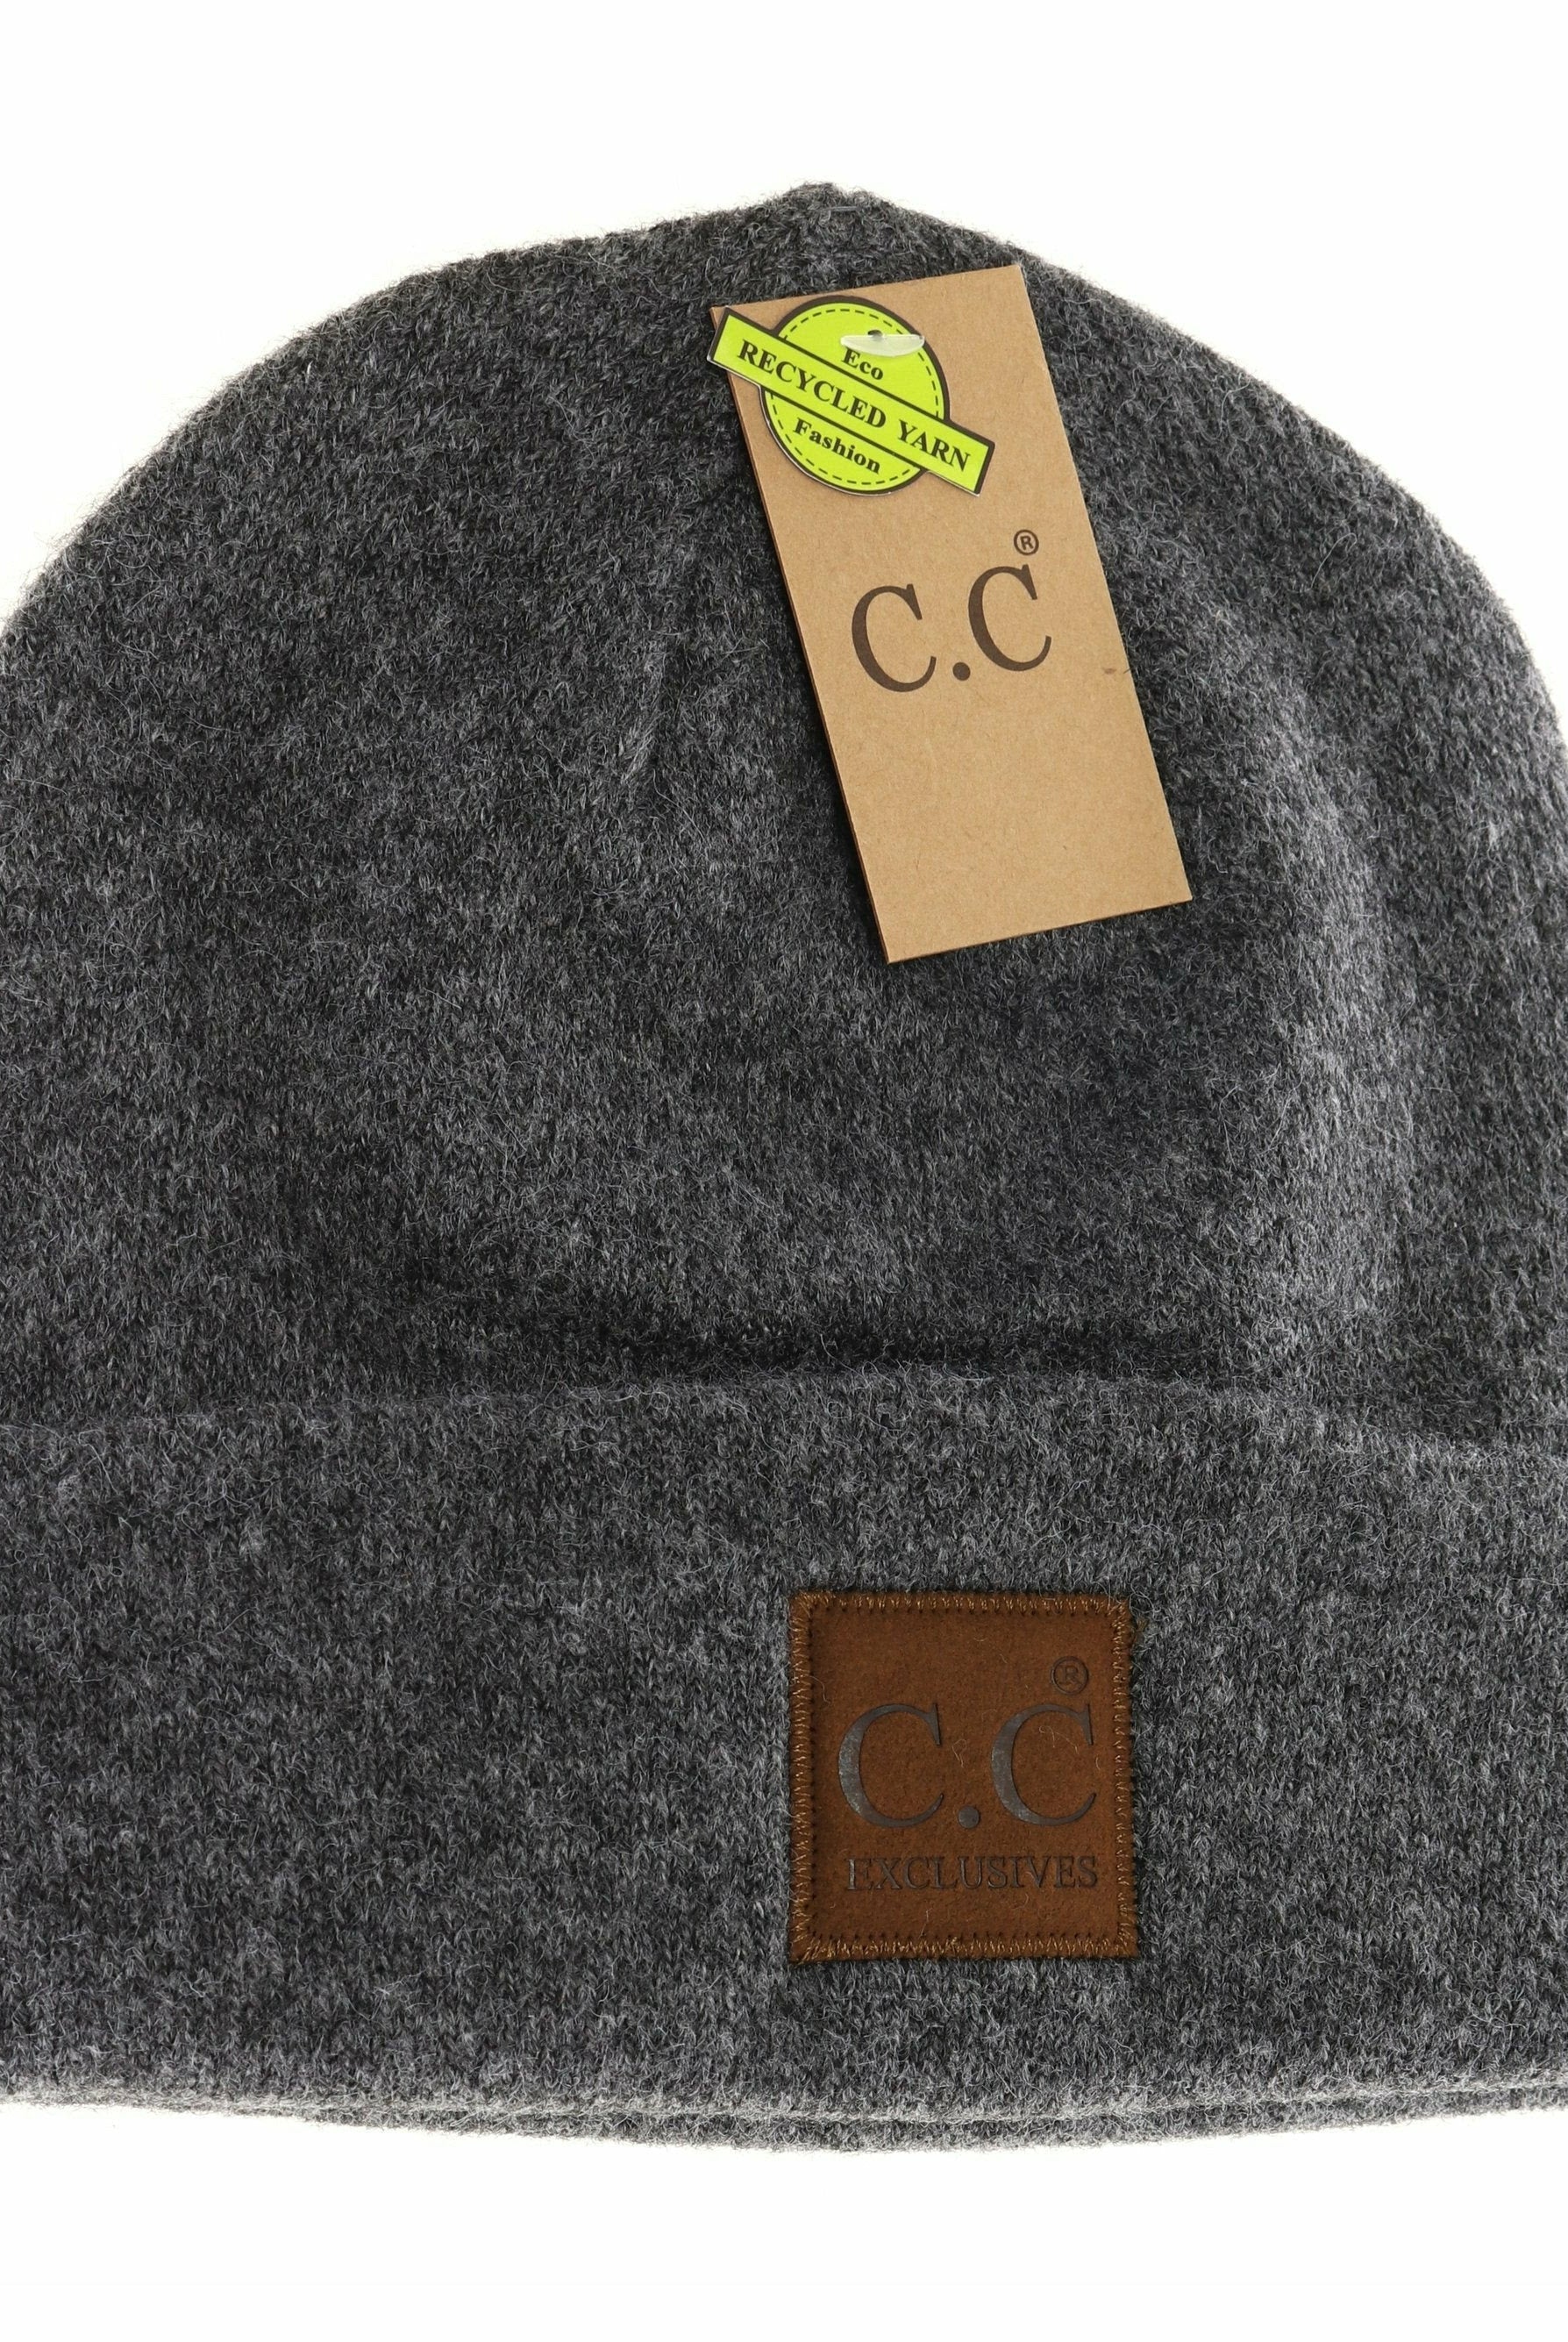 Unisex Soft Ribbed Leather Patch C.C. Beanie-Hats-Vixen Collection, Day Spa and Women's Boutique Located in Seattle, Washington